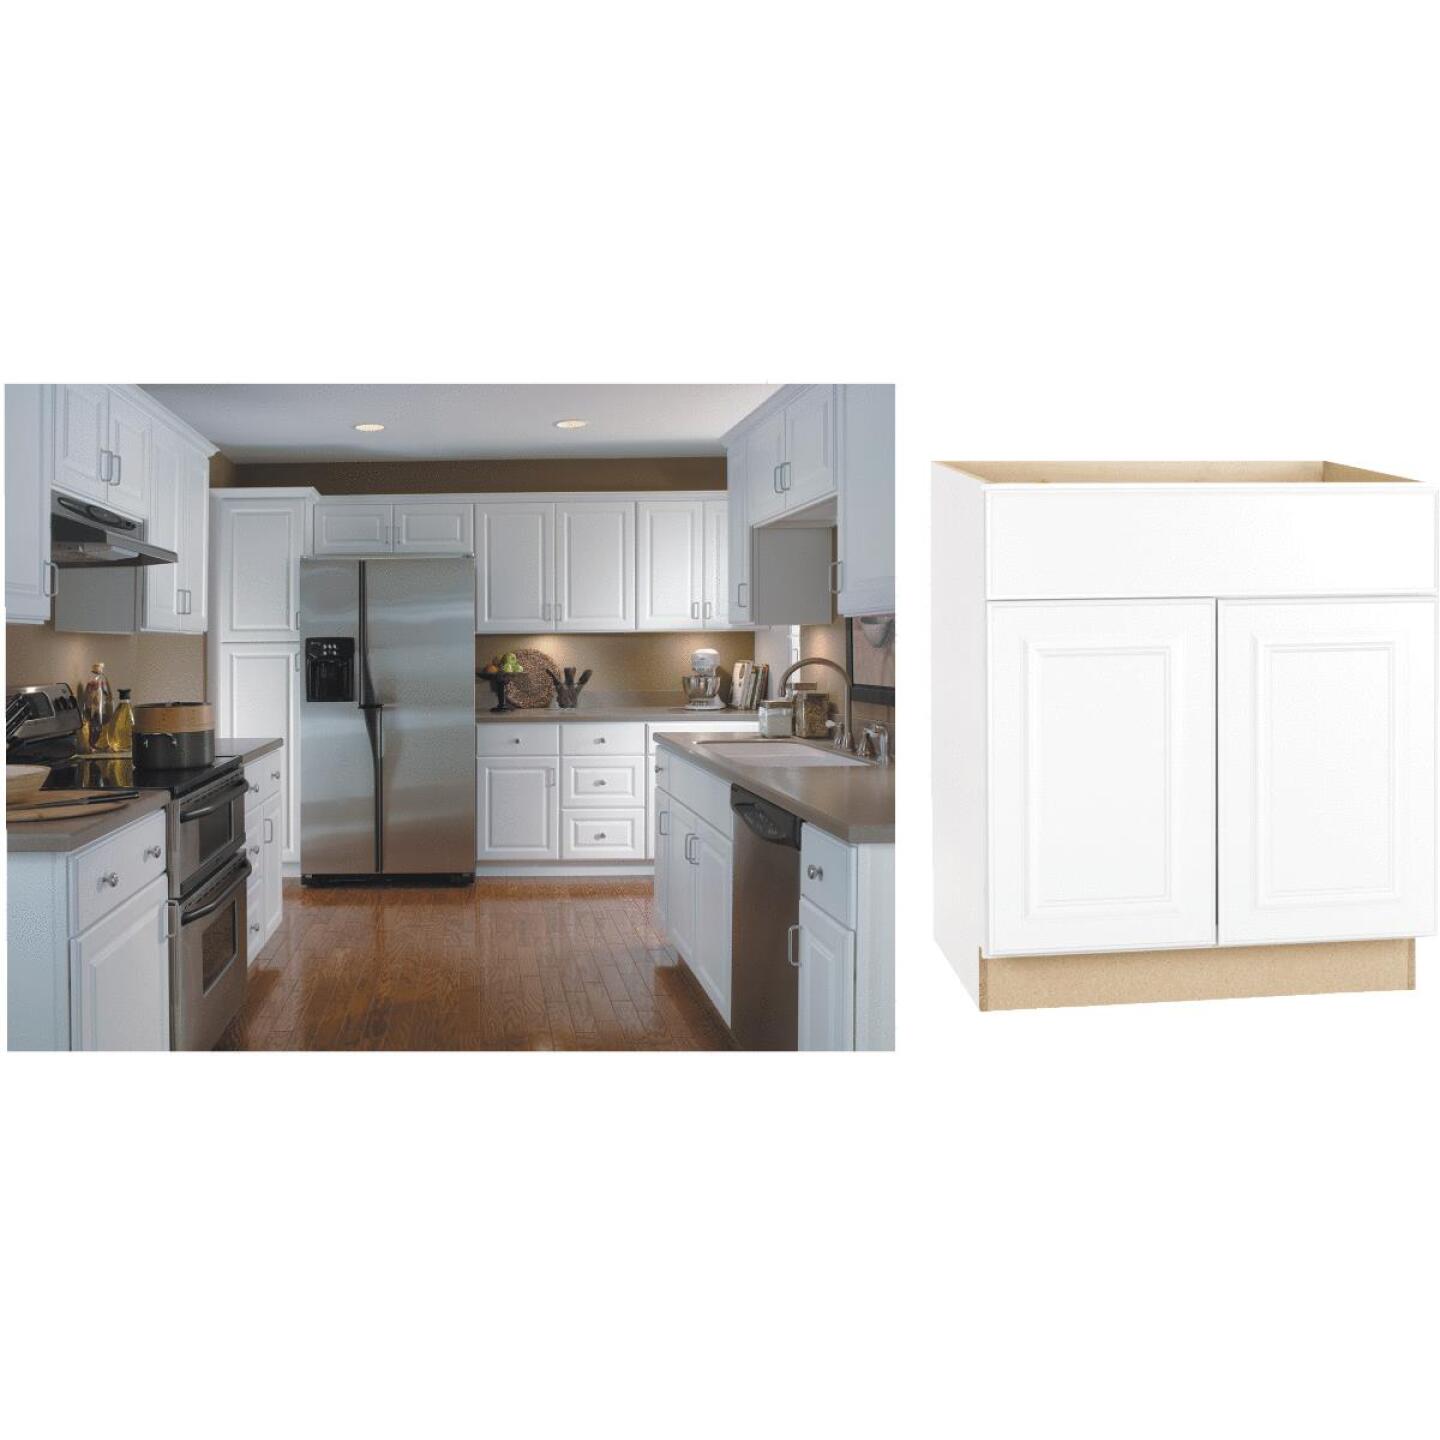 Continental Cabinets Hamilton 30 In W X 34 1 2 In H X 24 In D